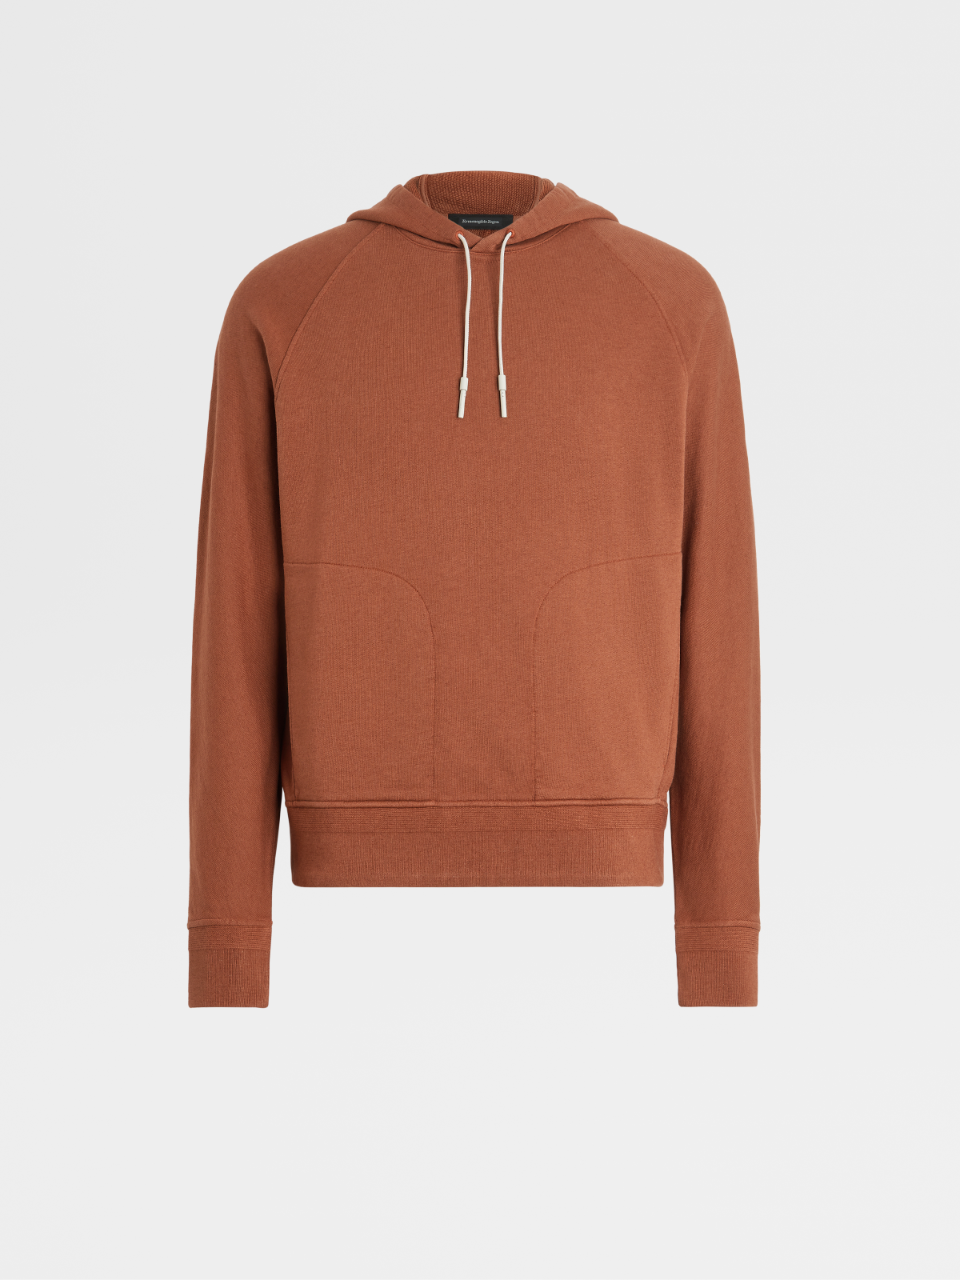 Cotton and Cashmere Hooded Sweatshirt